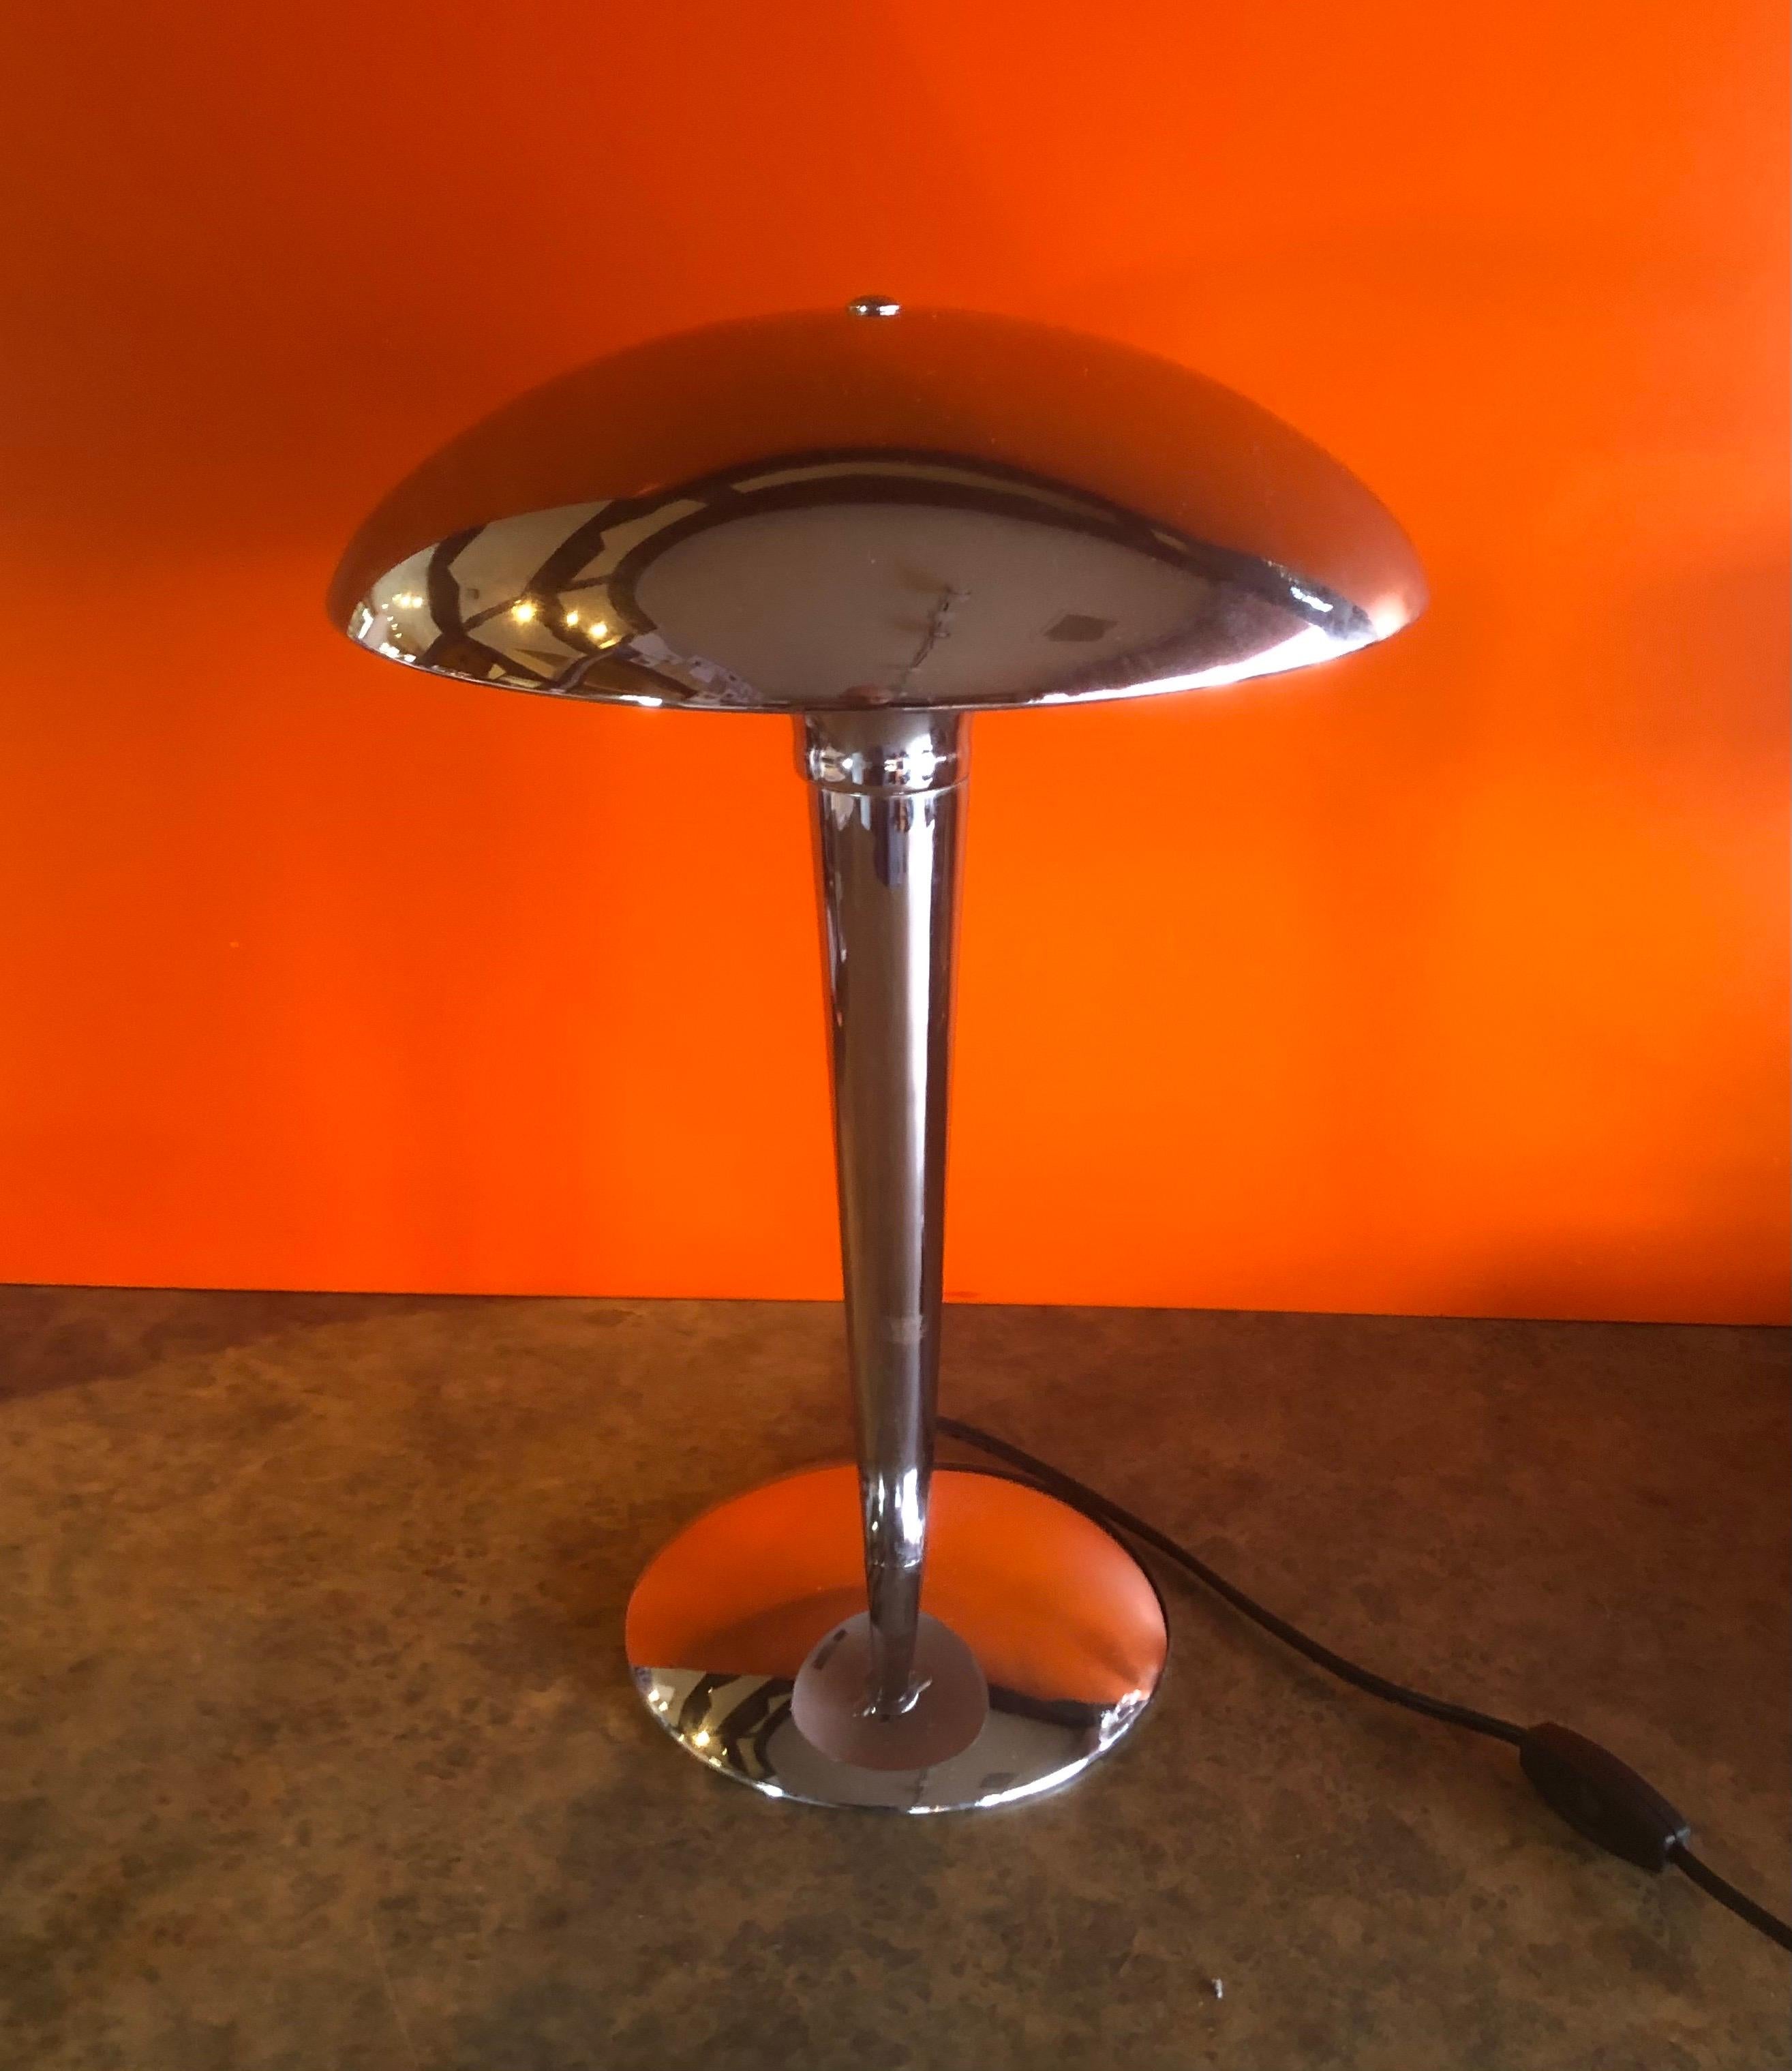 Space Age chrome table lamp with mushroom shade, circa 1970s. The lamp is American made and in very good vintage condition, it measures 13